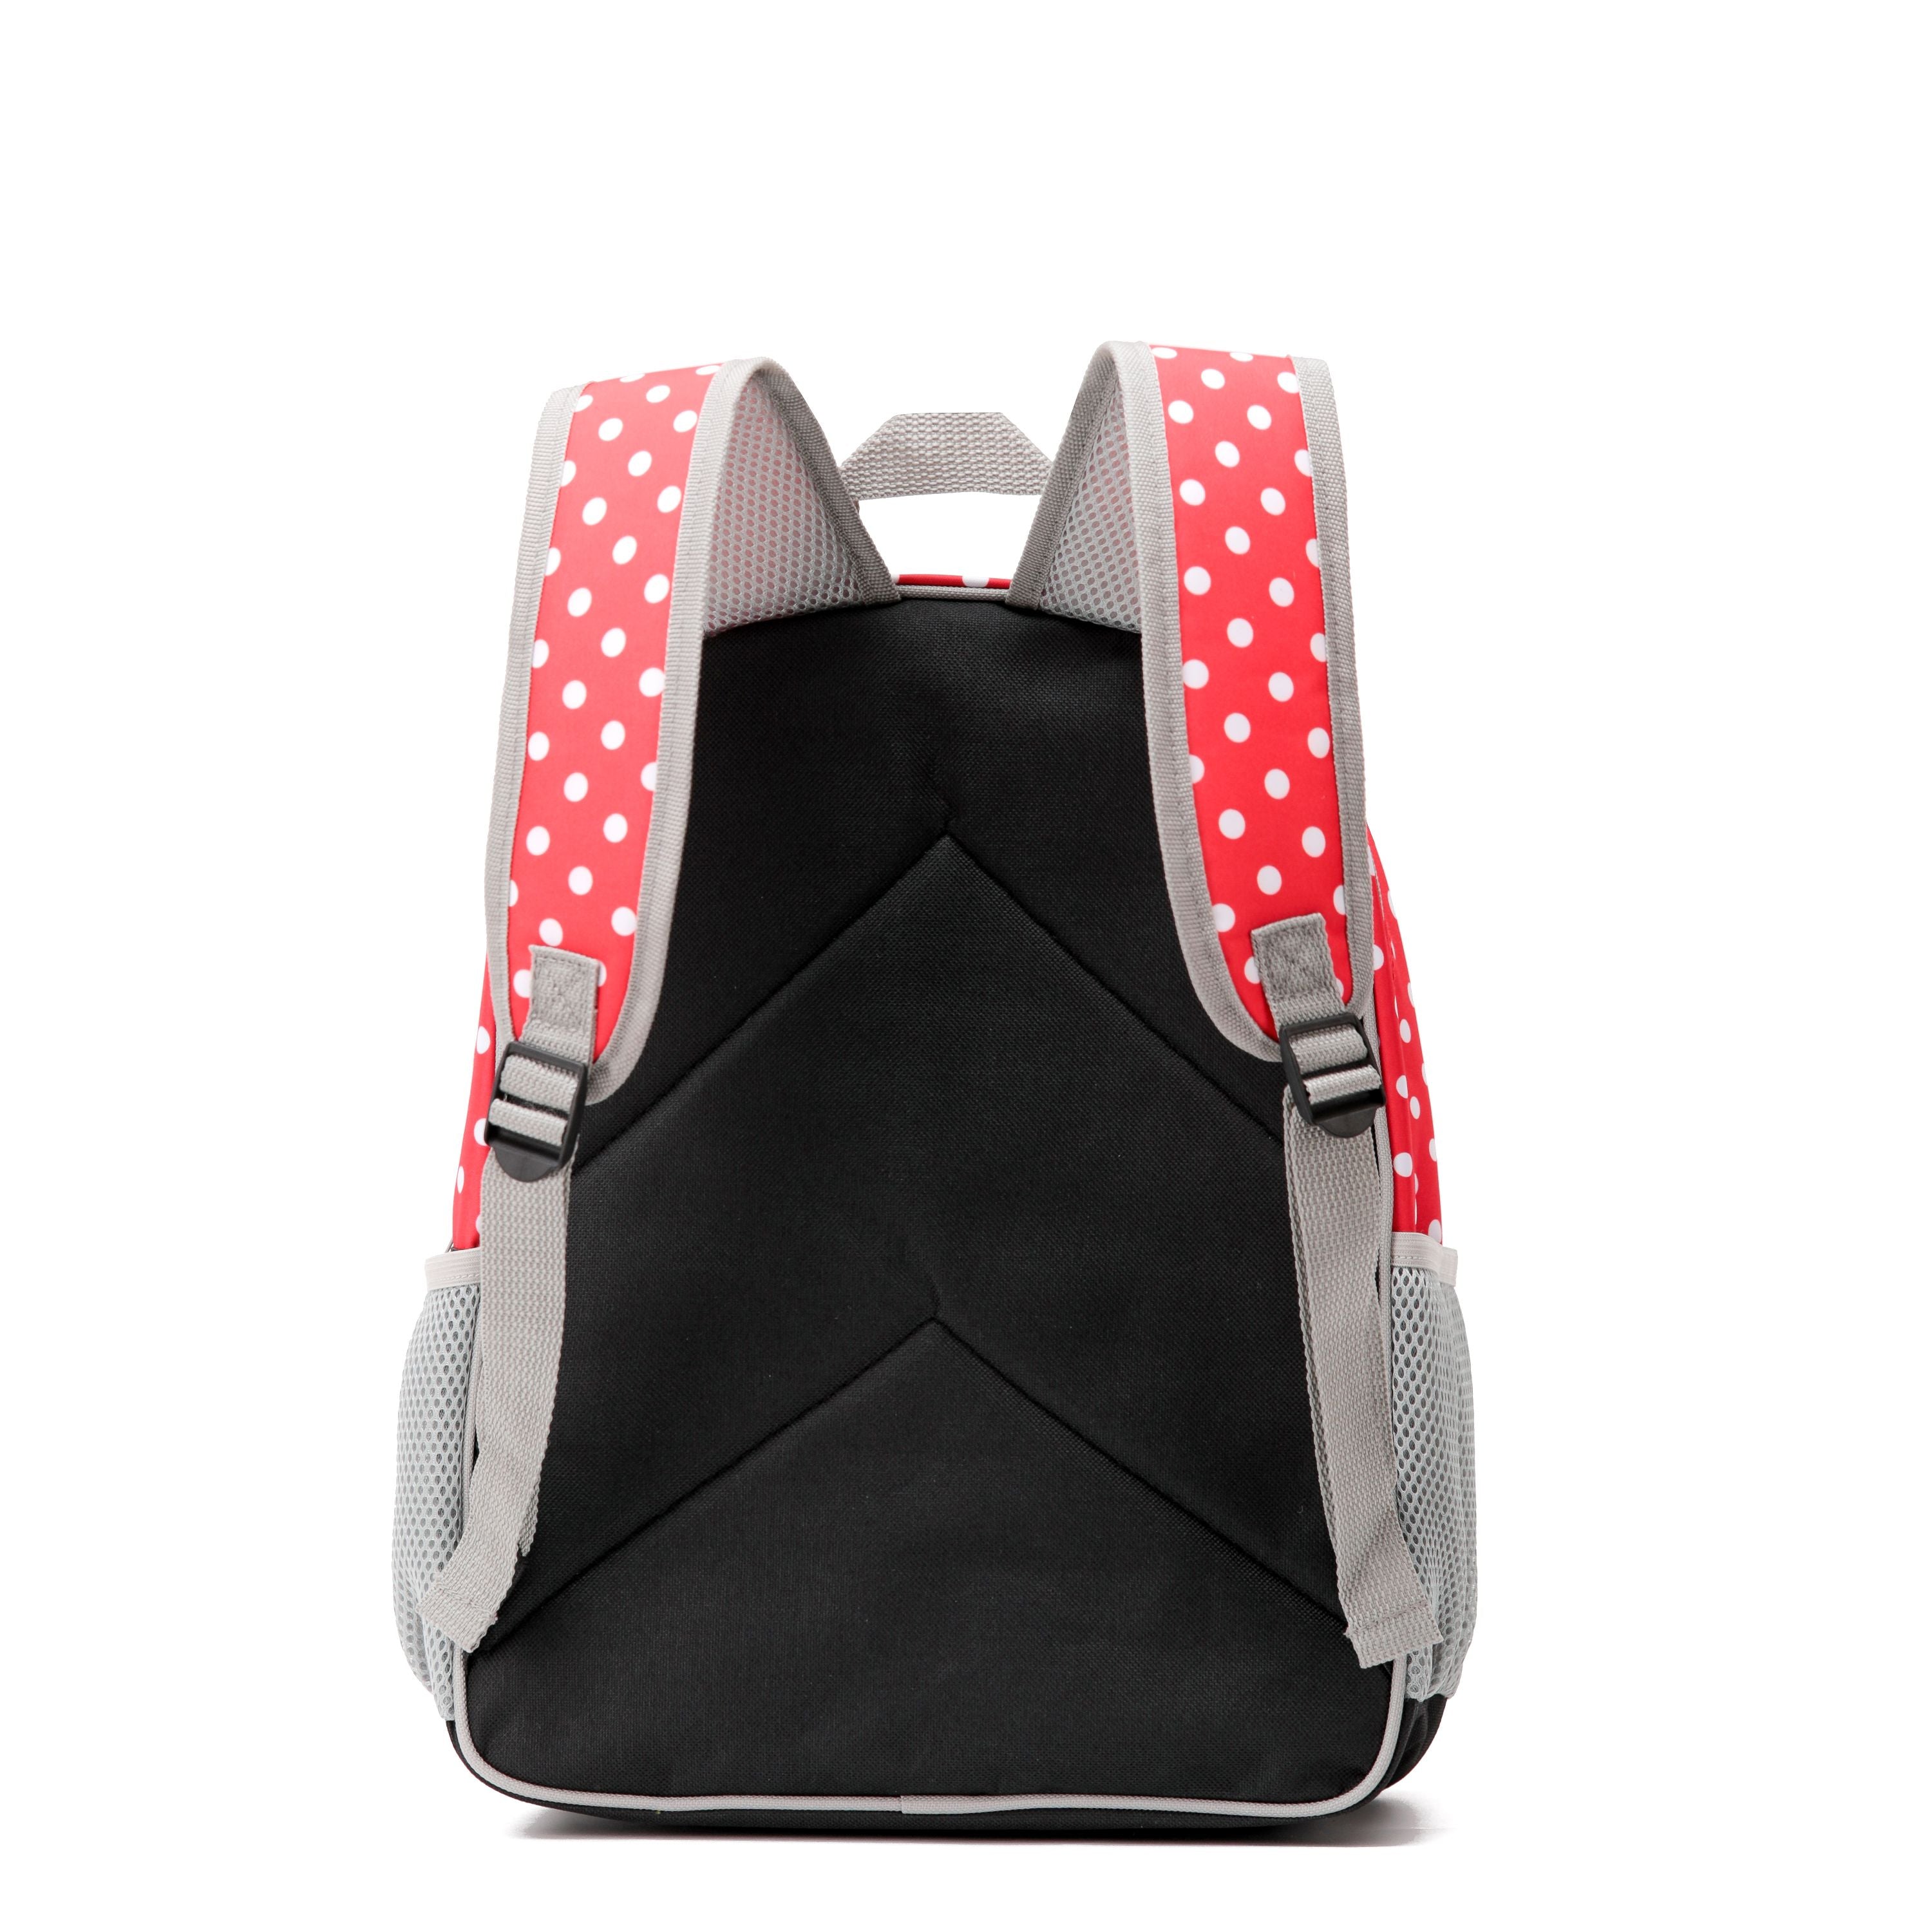 Disney - Minnie Mouse Dis215 15in Hologram backpack - Black/Red-2